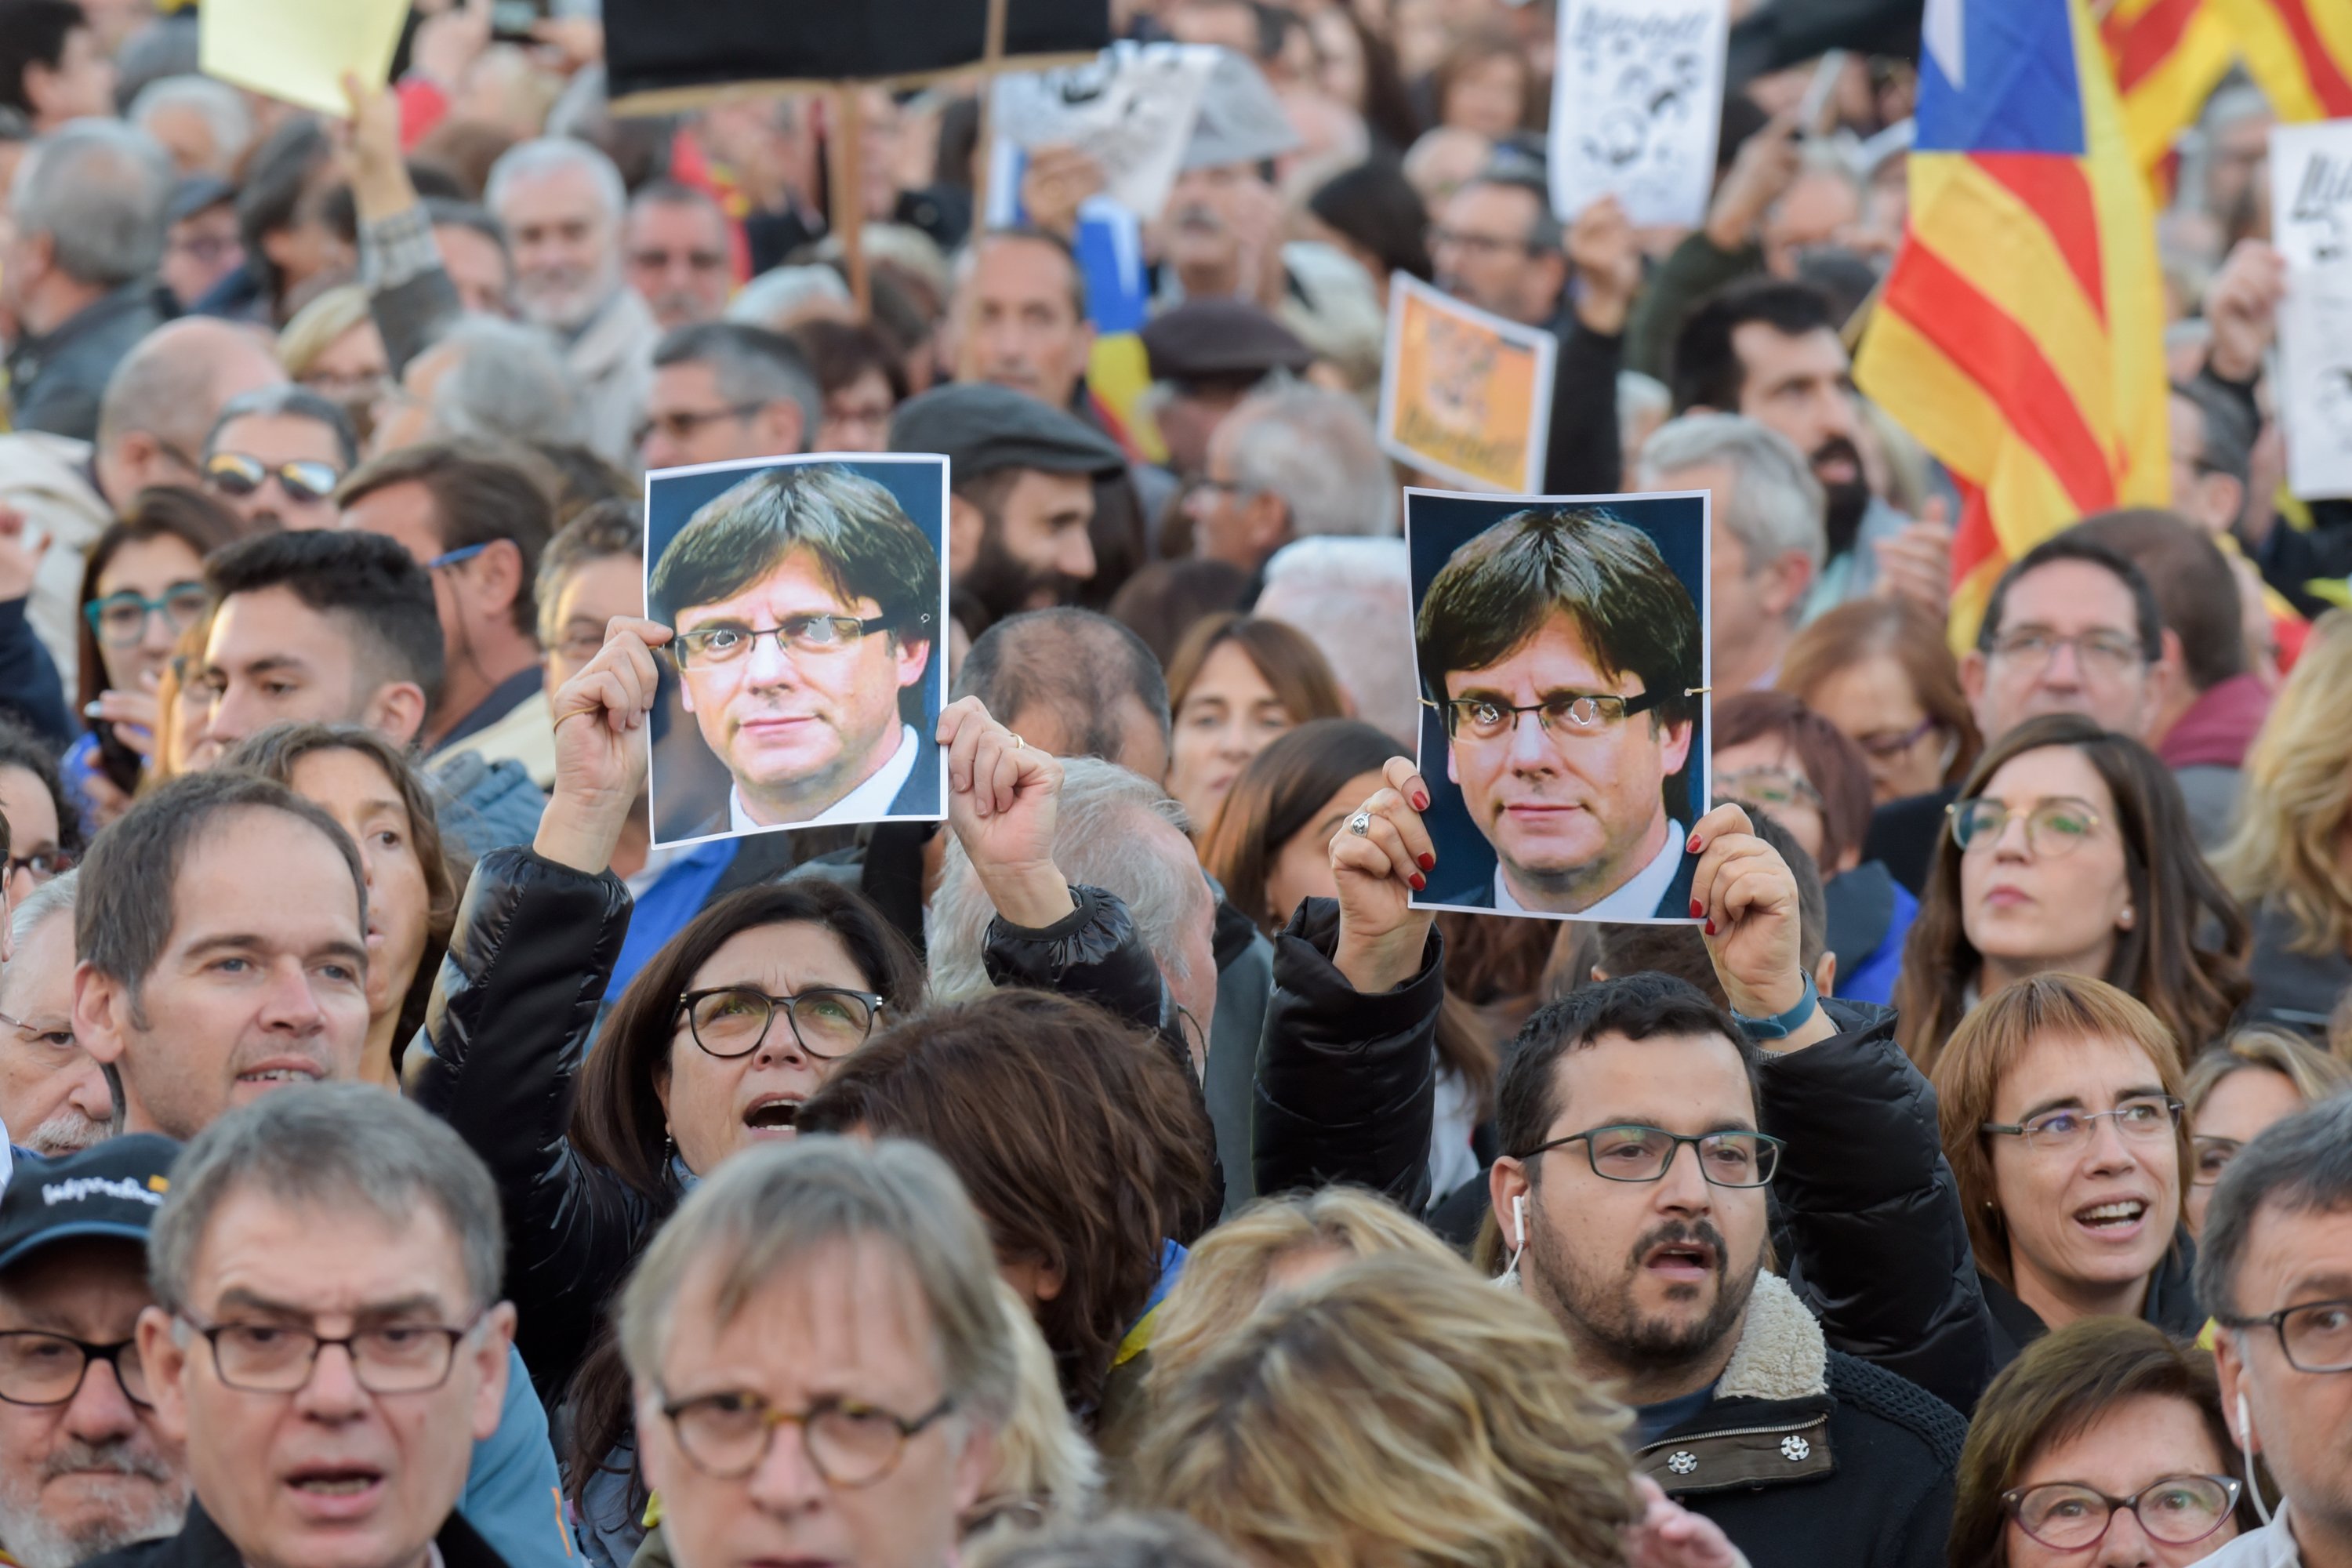 Messages from Puigdemont, exiled ministers to today's rally: "We have the right to be a new country"